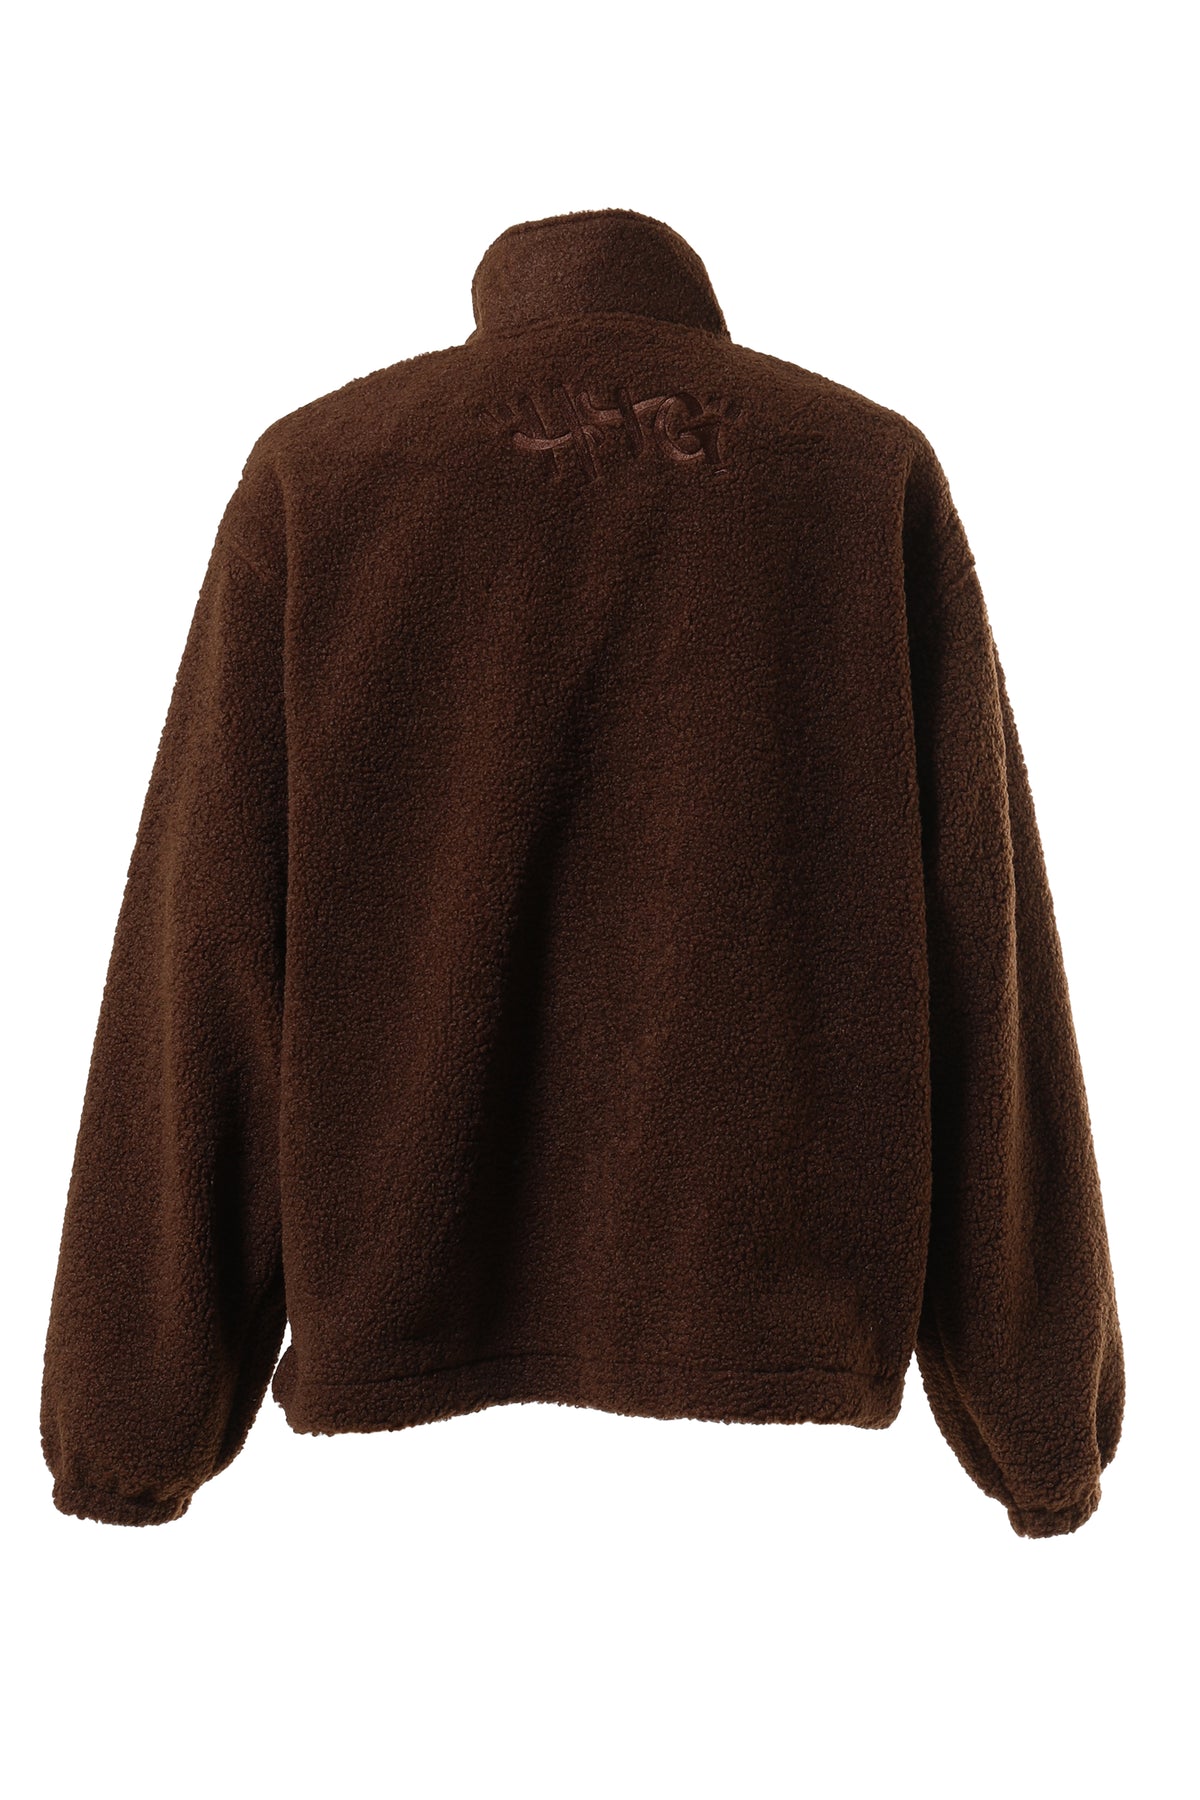 HONOR THE GIFT SCRIPT SHERPA PULLOVER / BRWN